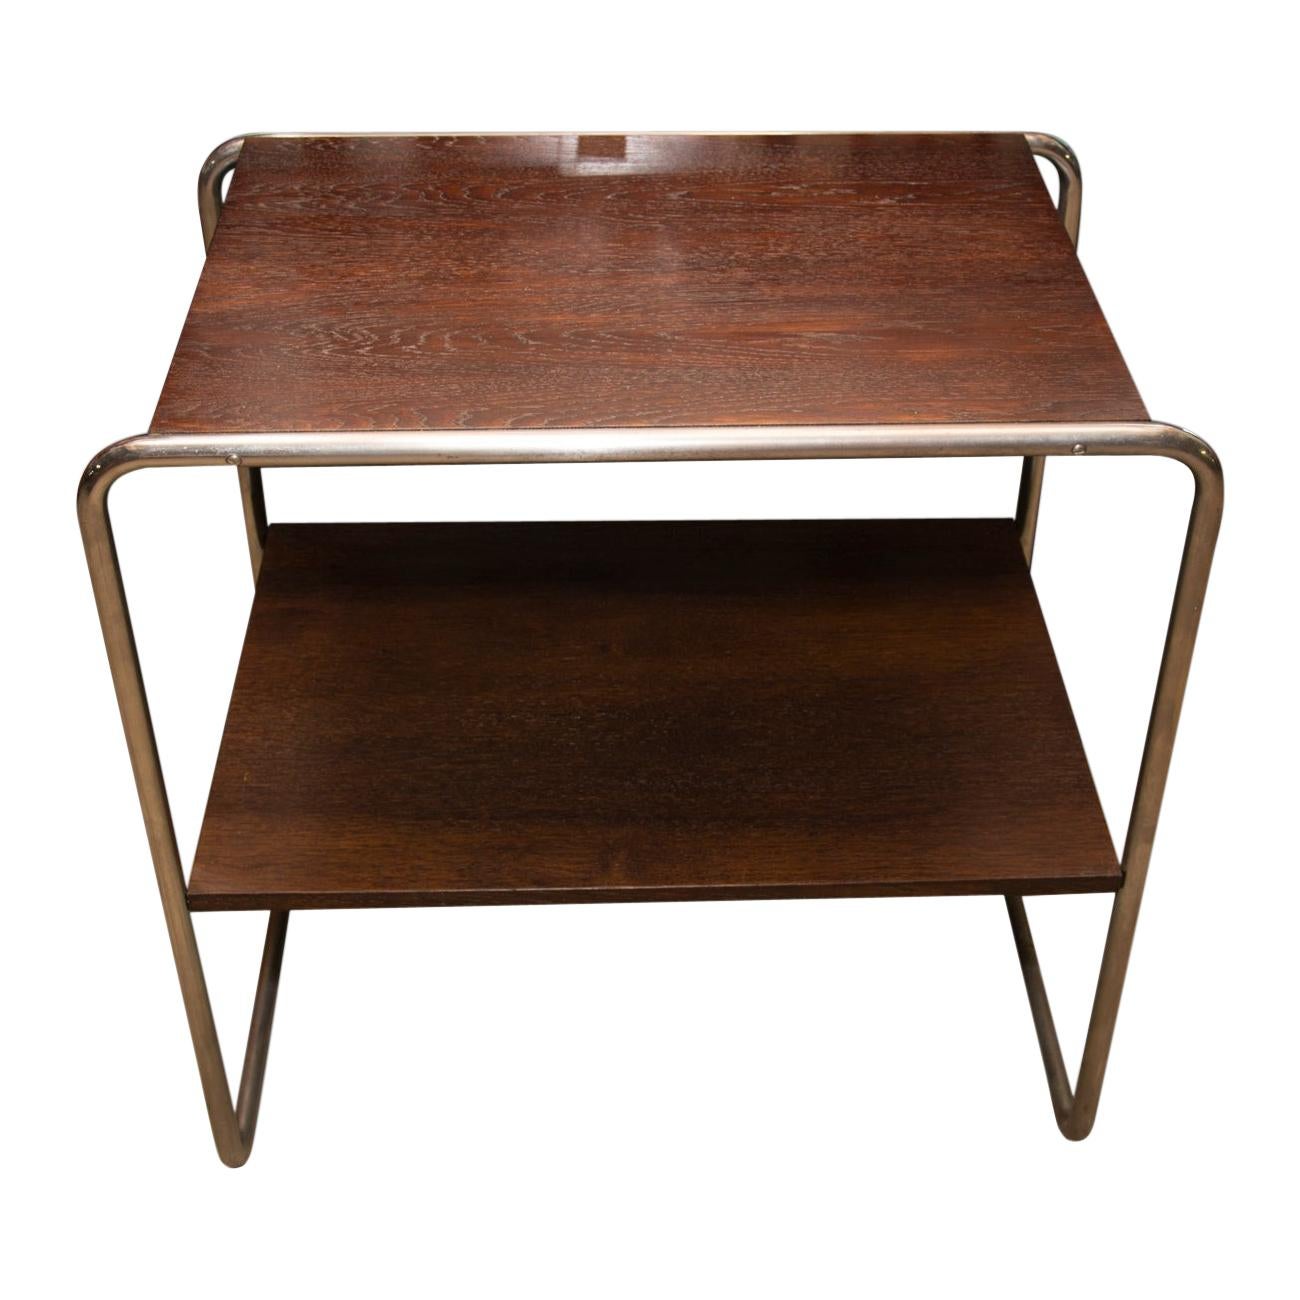 Bauhause Side Table designed by Marcel Breuer, 1930s